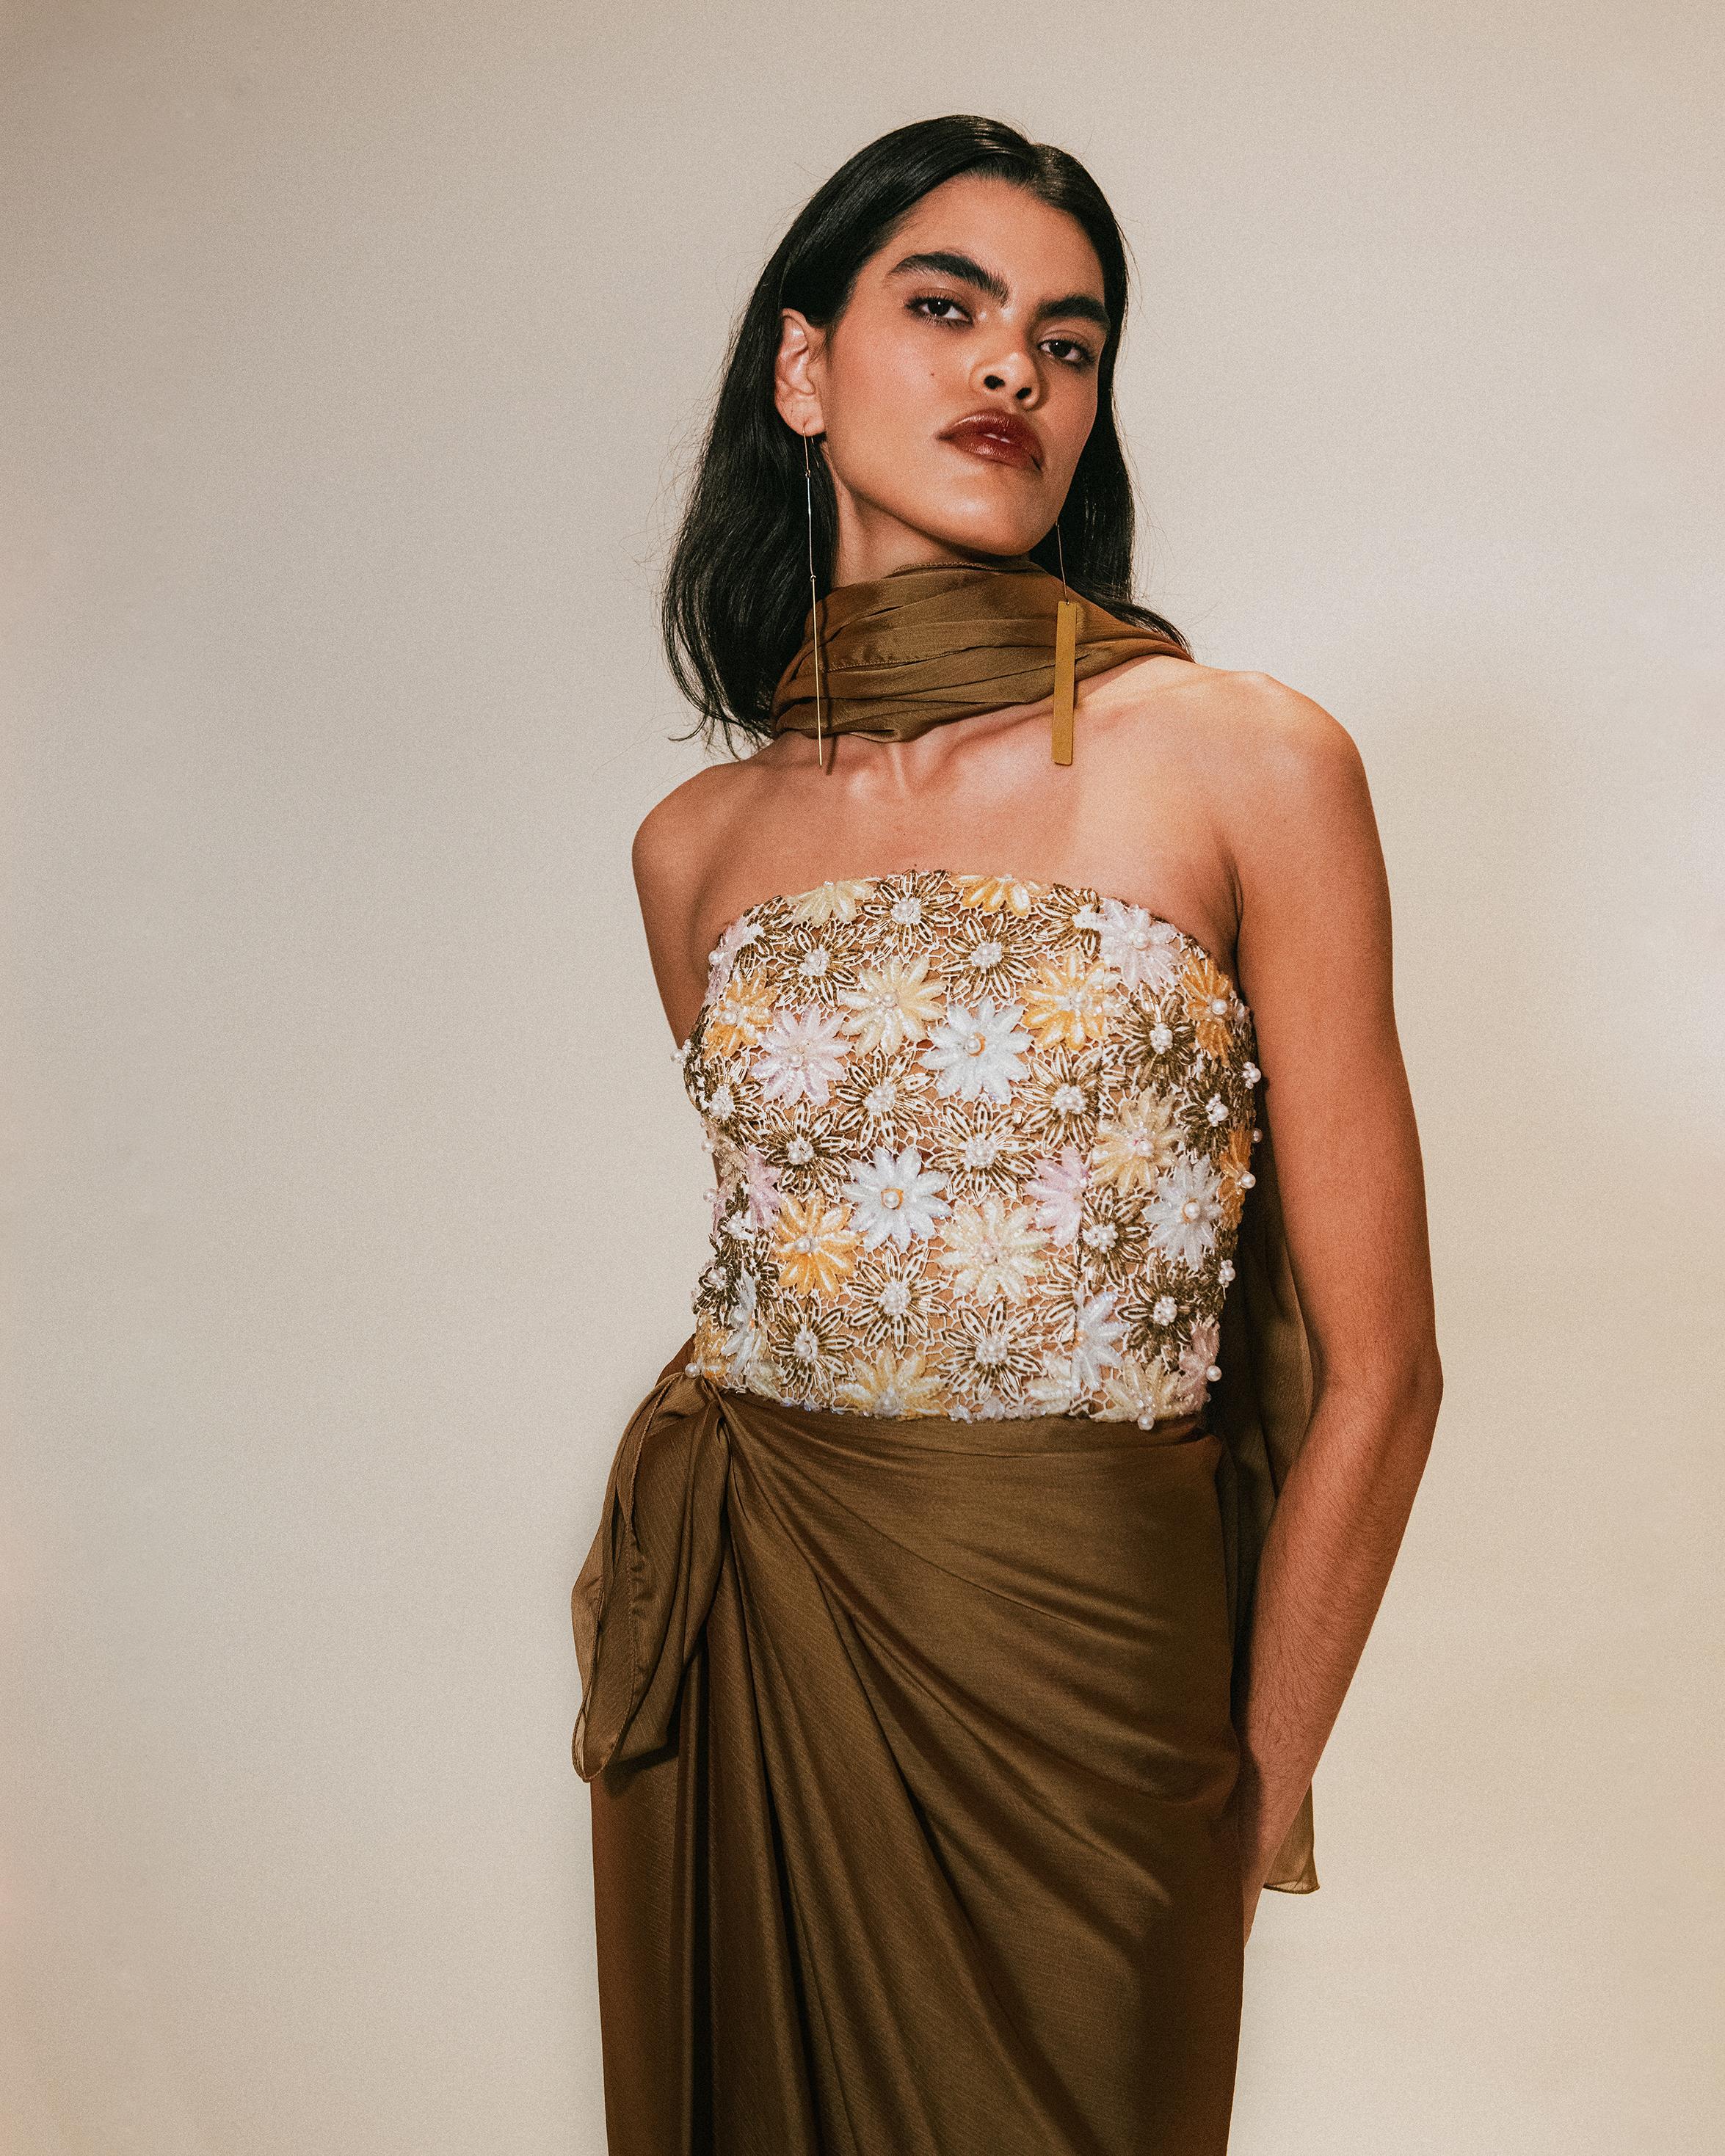 c. 1991 Nina Ricci embellished copper-brown strapless gown with stole. Upper features embellished, embroidered floral detailing with faux pearls at center of flowers. Built-in corset with boning. Silk gown has drape at hip and back zip closure. Can